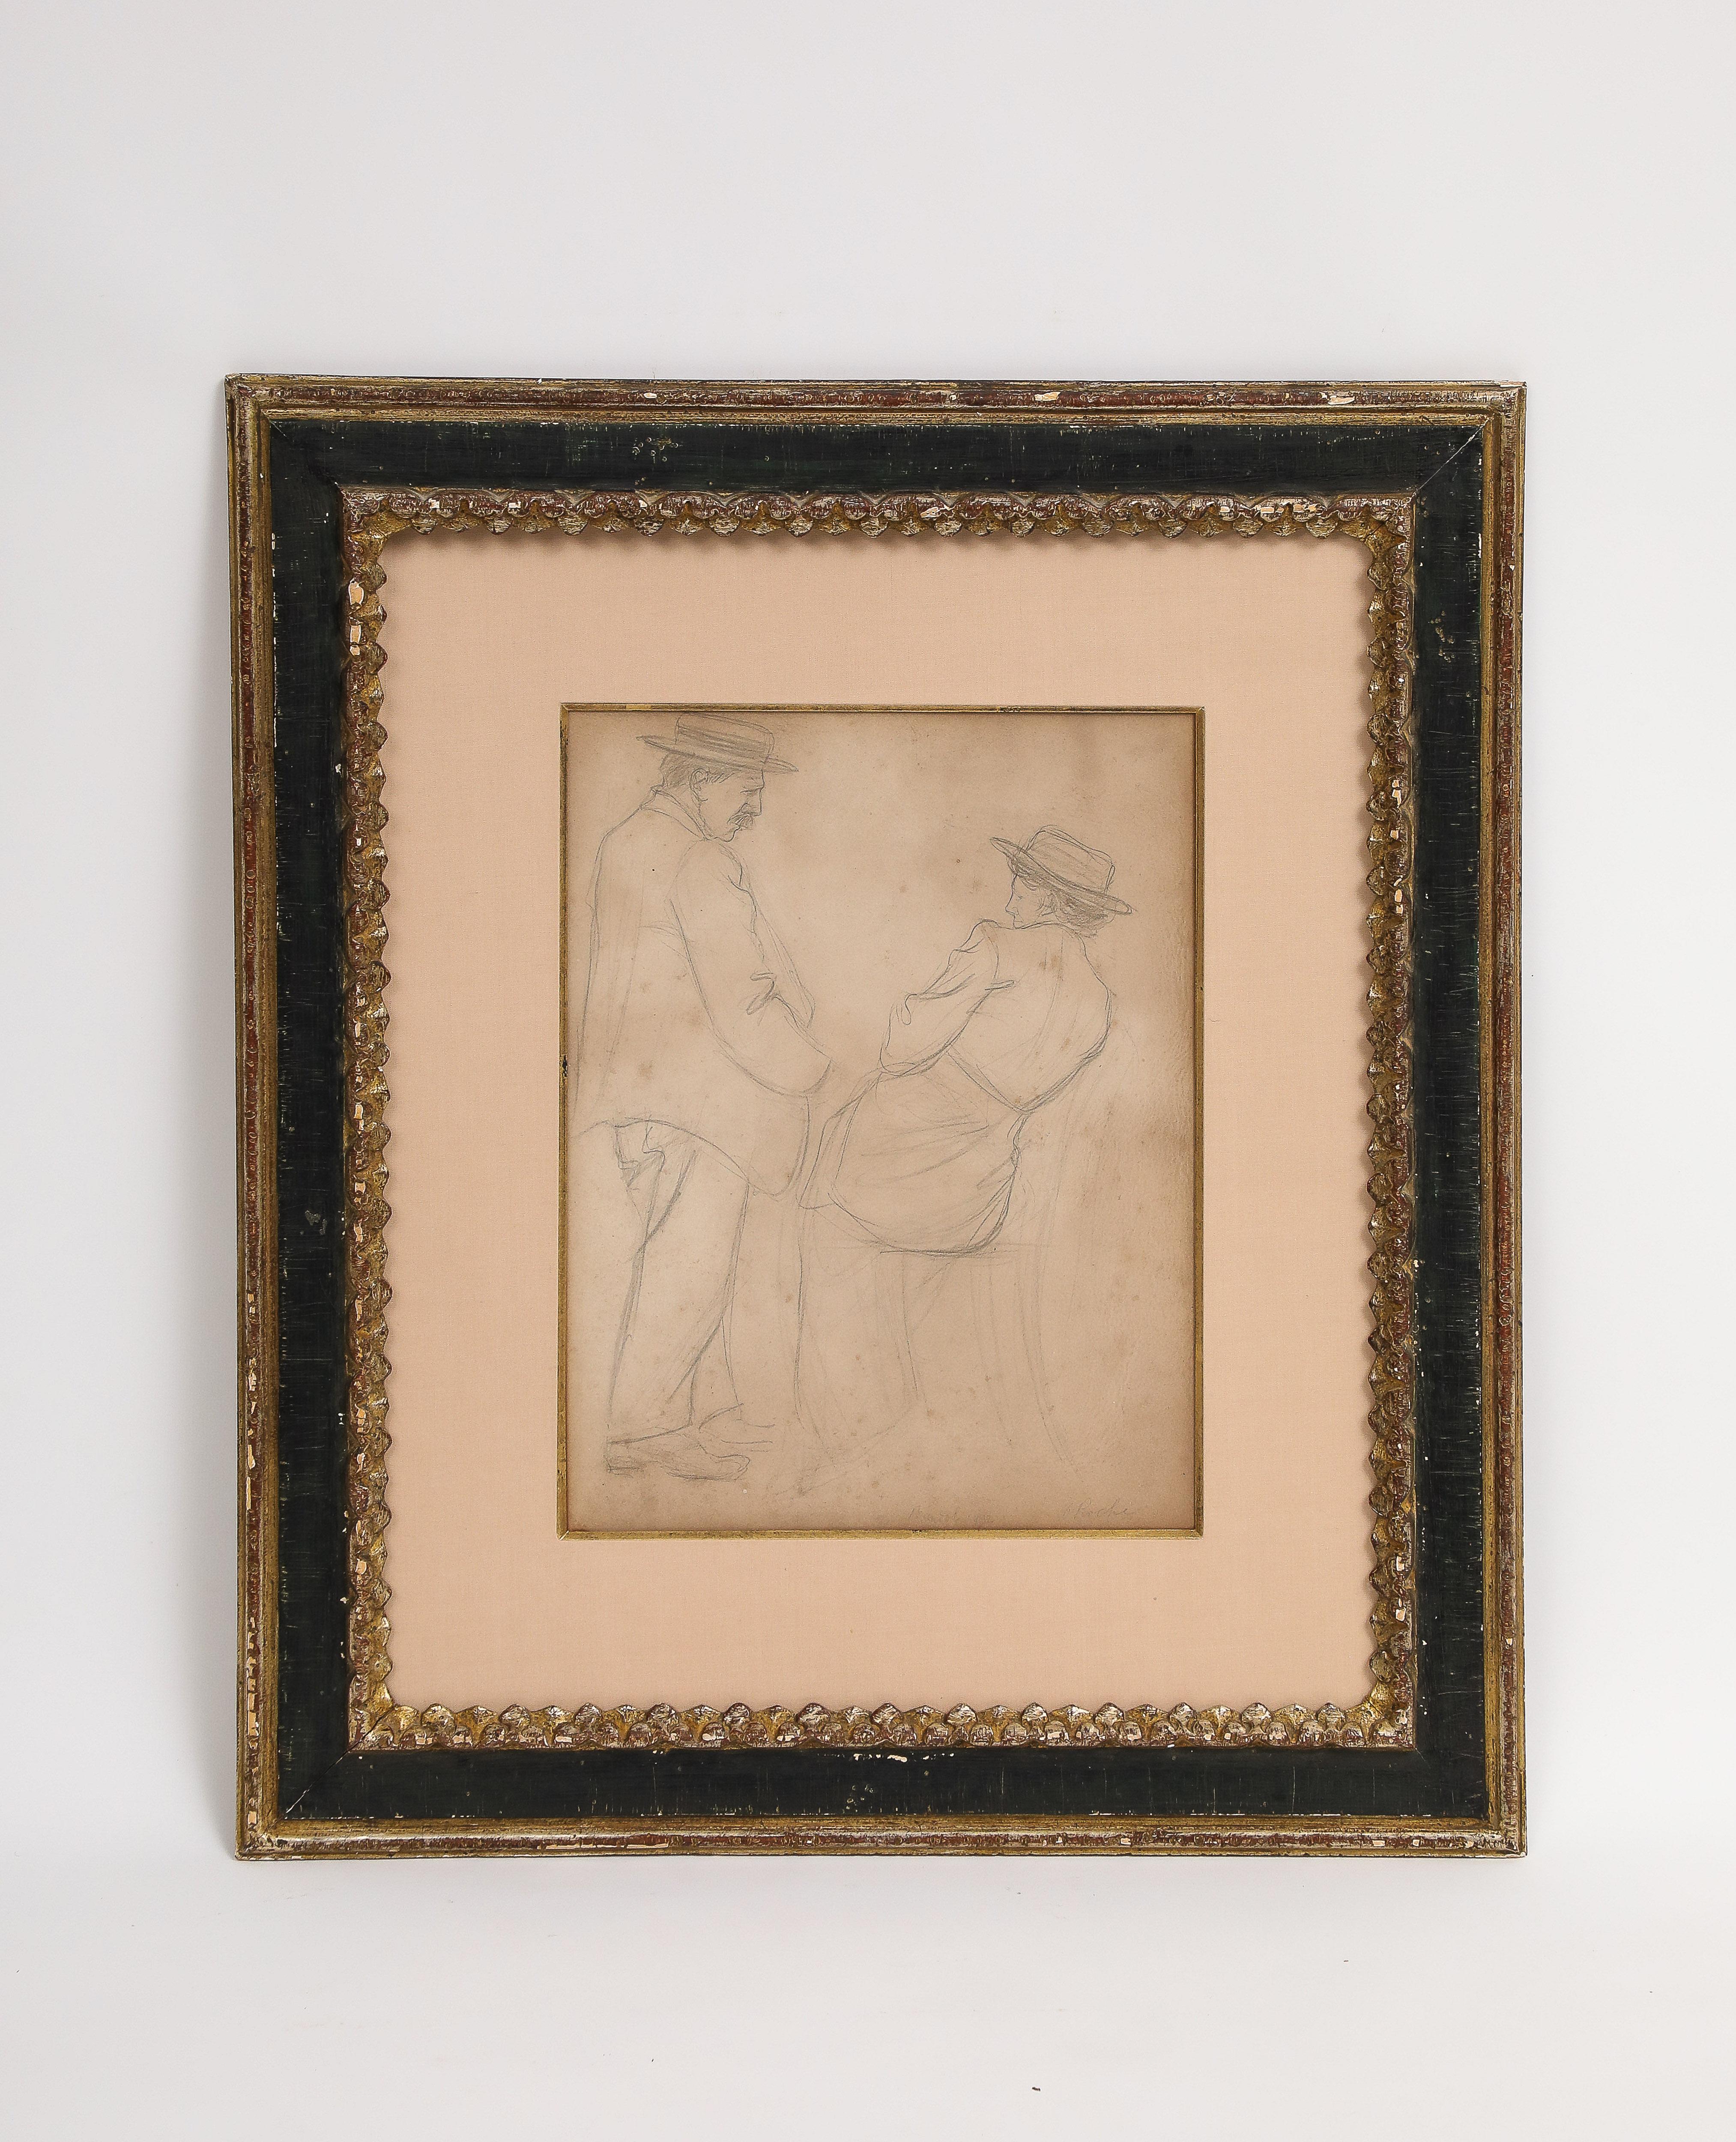 Framed sketch on paper by Odilon Roche (French, 1868-1947), 